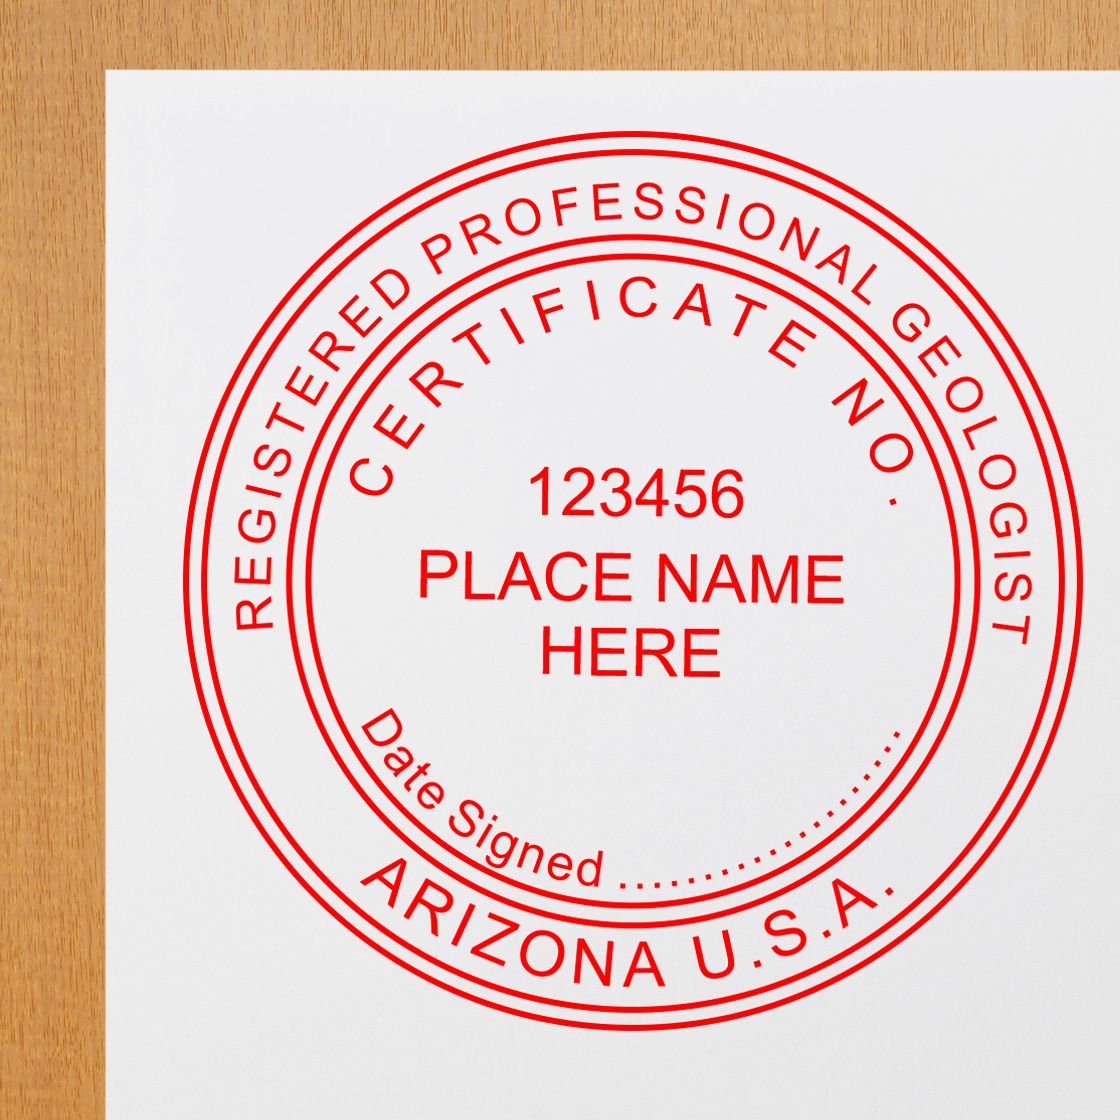 Another Example of a stamped impression of the Self-Inking Arizona Geologist Stamp on a office form